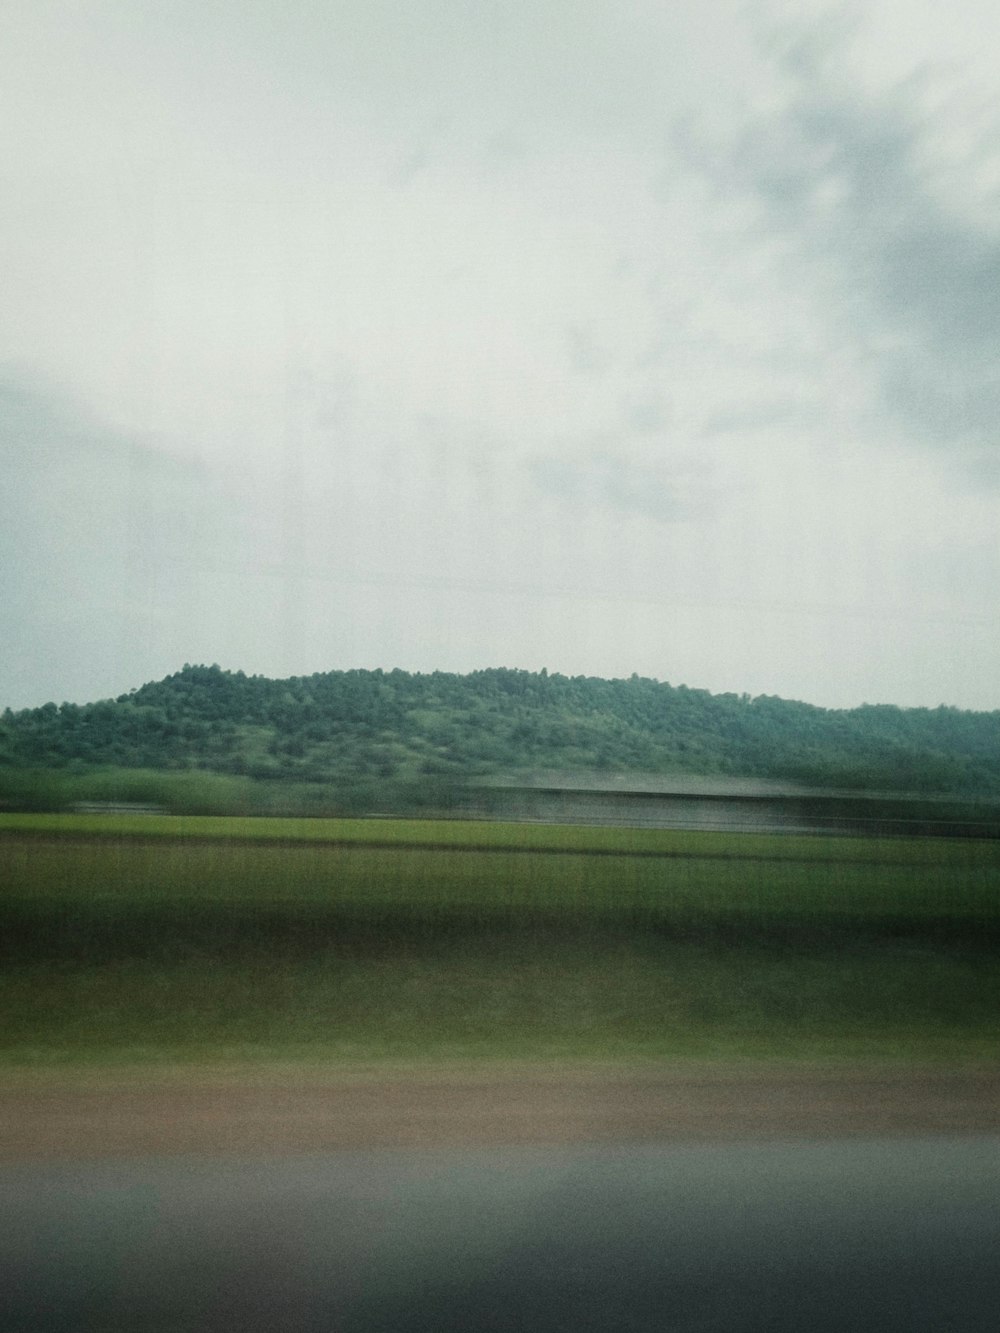 a view of a hill from a moving vehicle